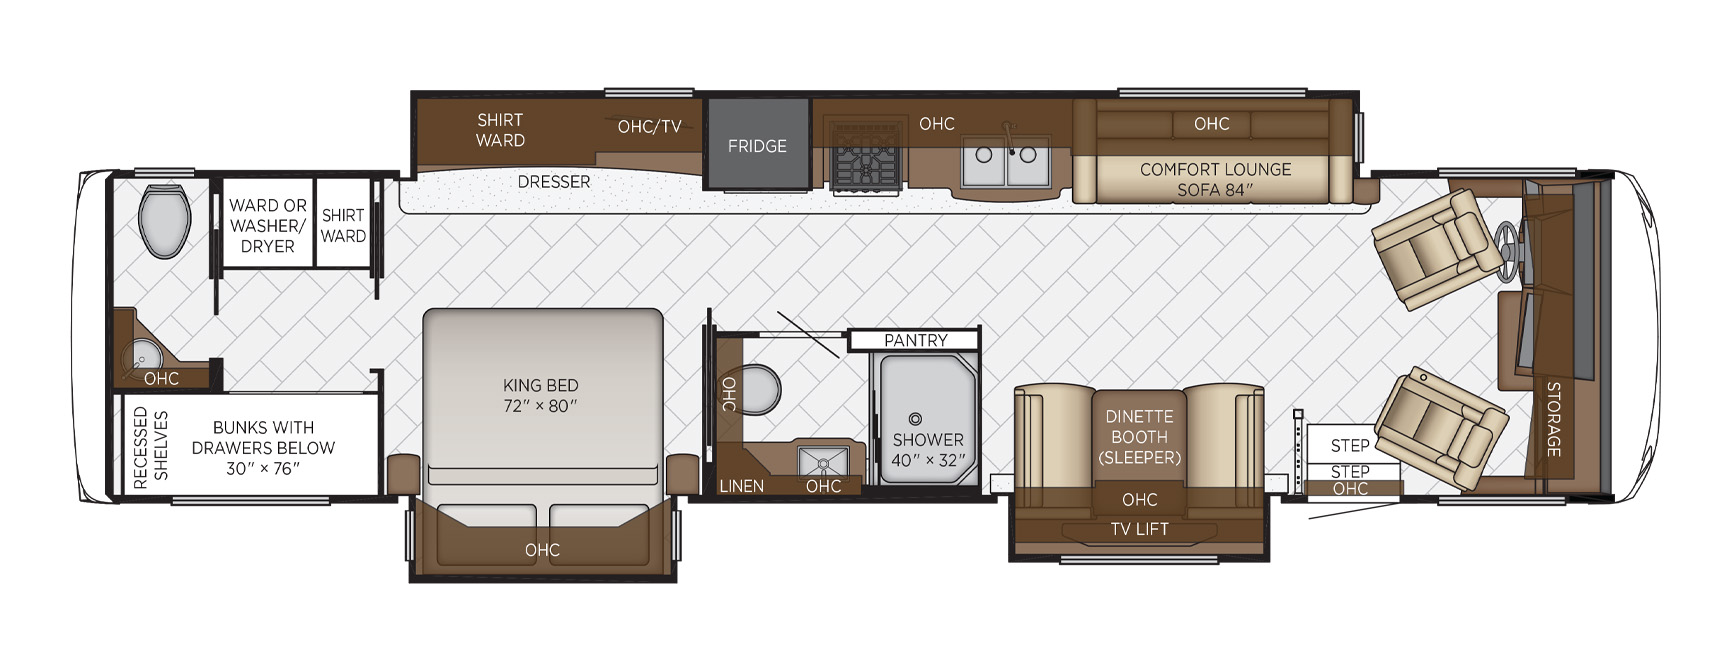 The floor plan of the Newmar Canyon Star 3929